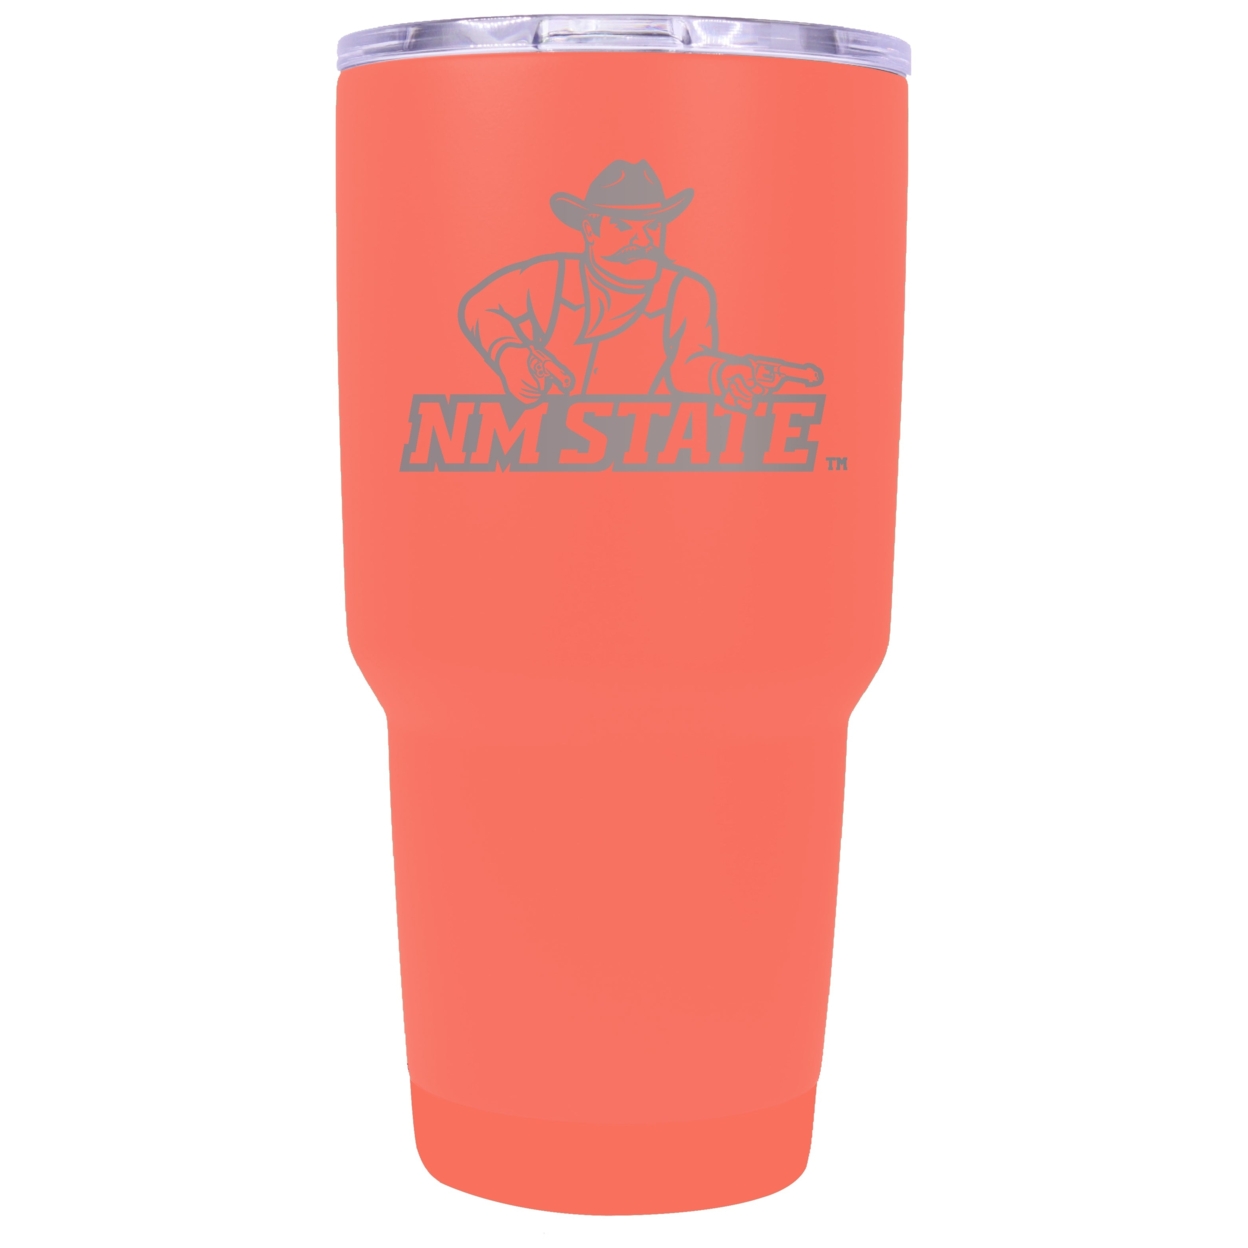 New Mexico State University Pistol Pete 24 Oz Laser Engraved Stainless Steel Insulated Tumbler - Choose Your Color. - Coral